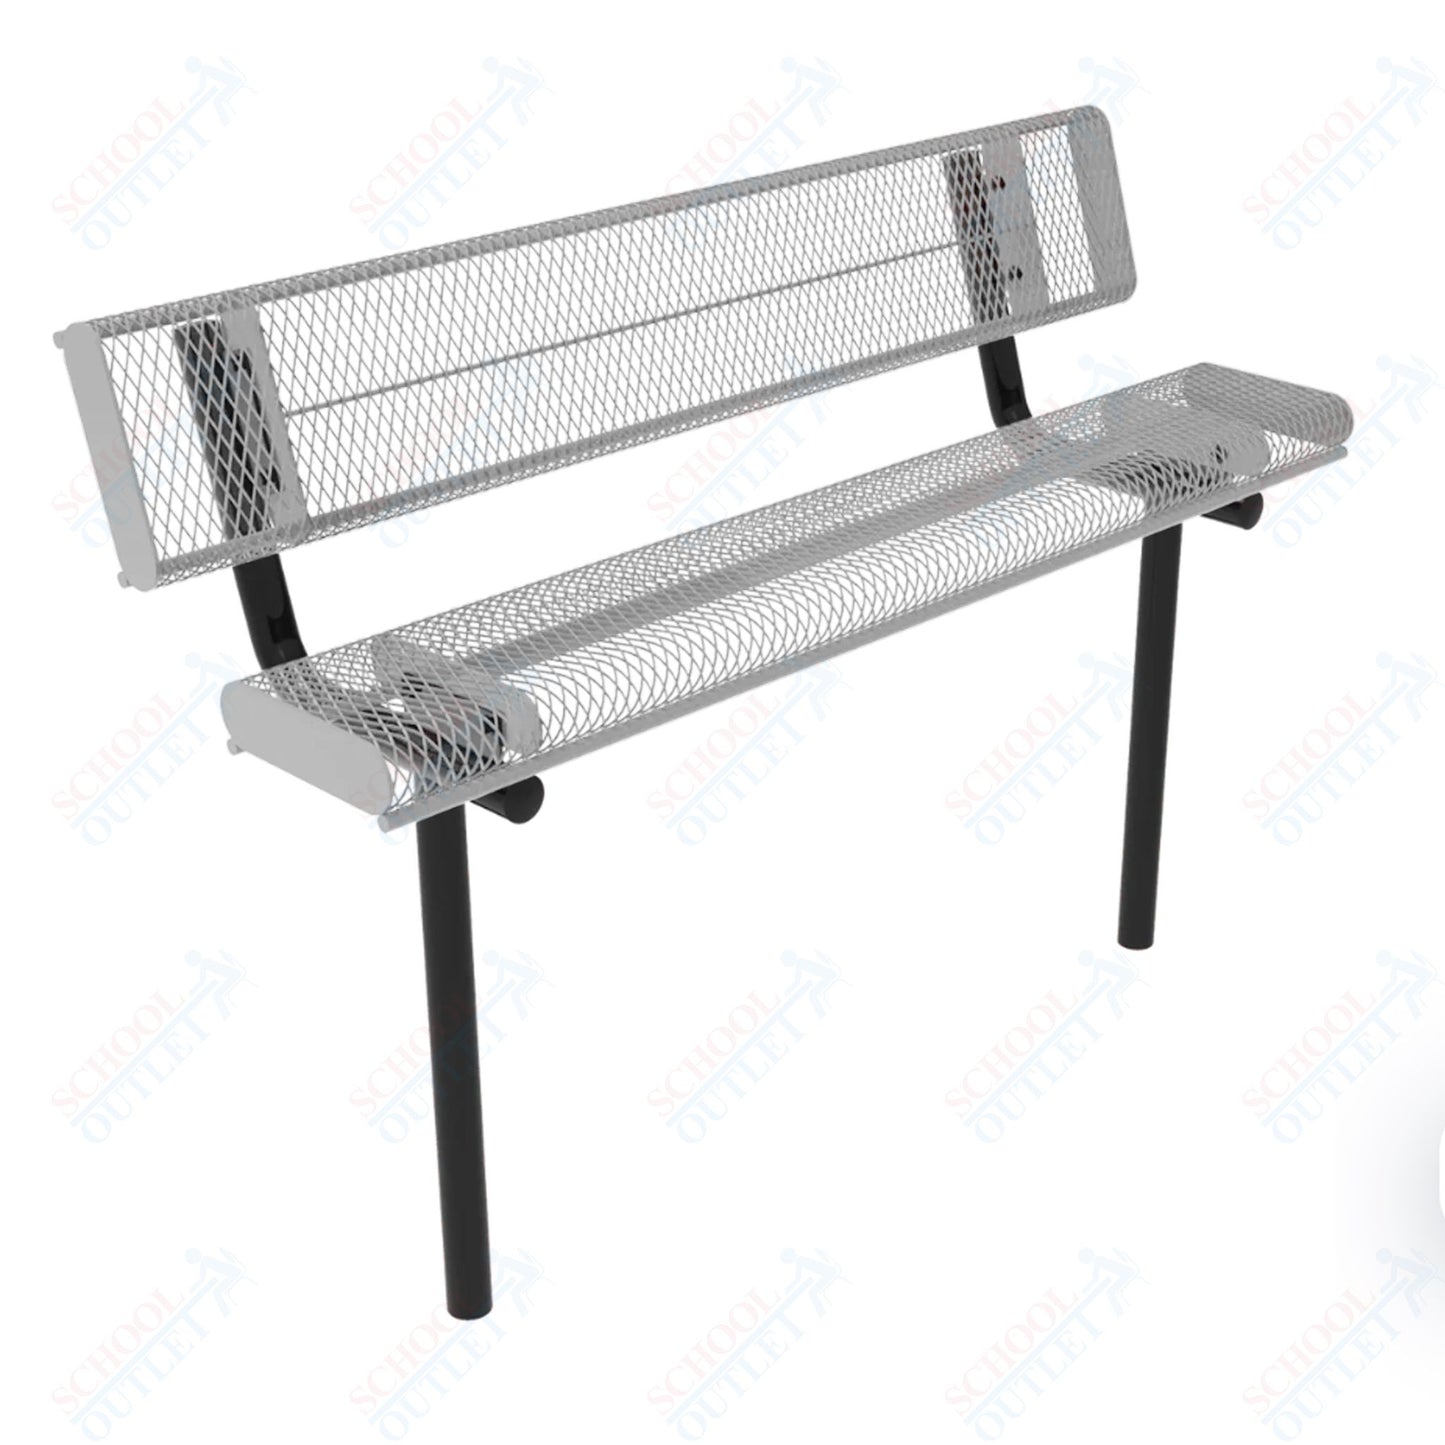 MyTcoat - Rolled Edges Outdoor Bench with Back 6' L - Inground Mount (MYT-BRE06-19)